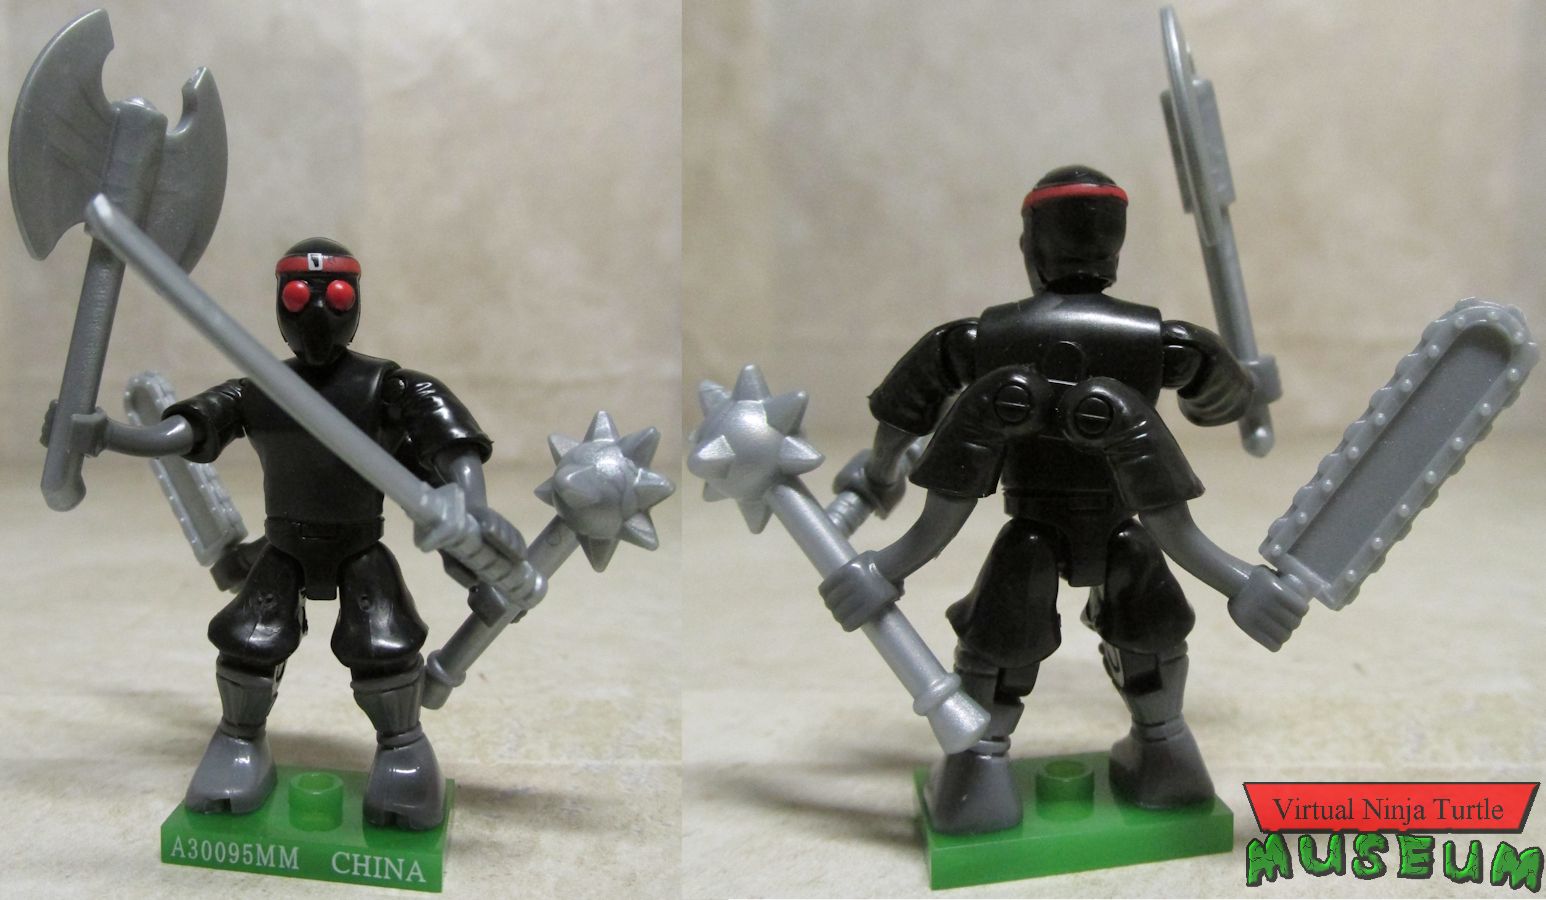 Robotic Foot Soldier front and back